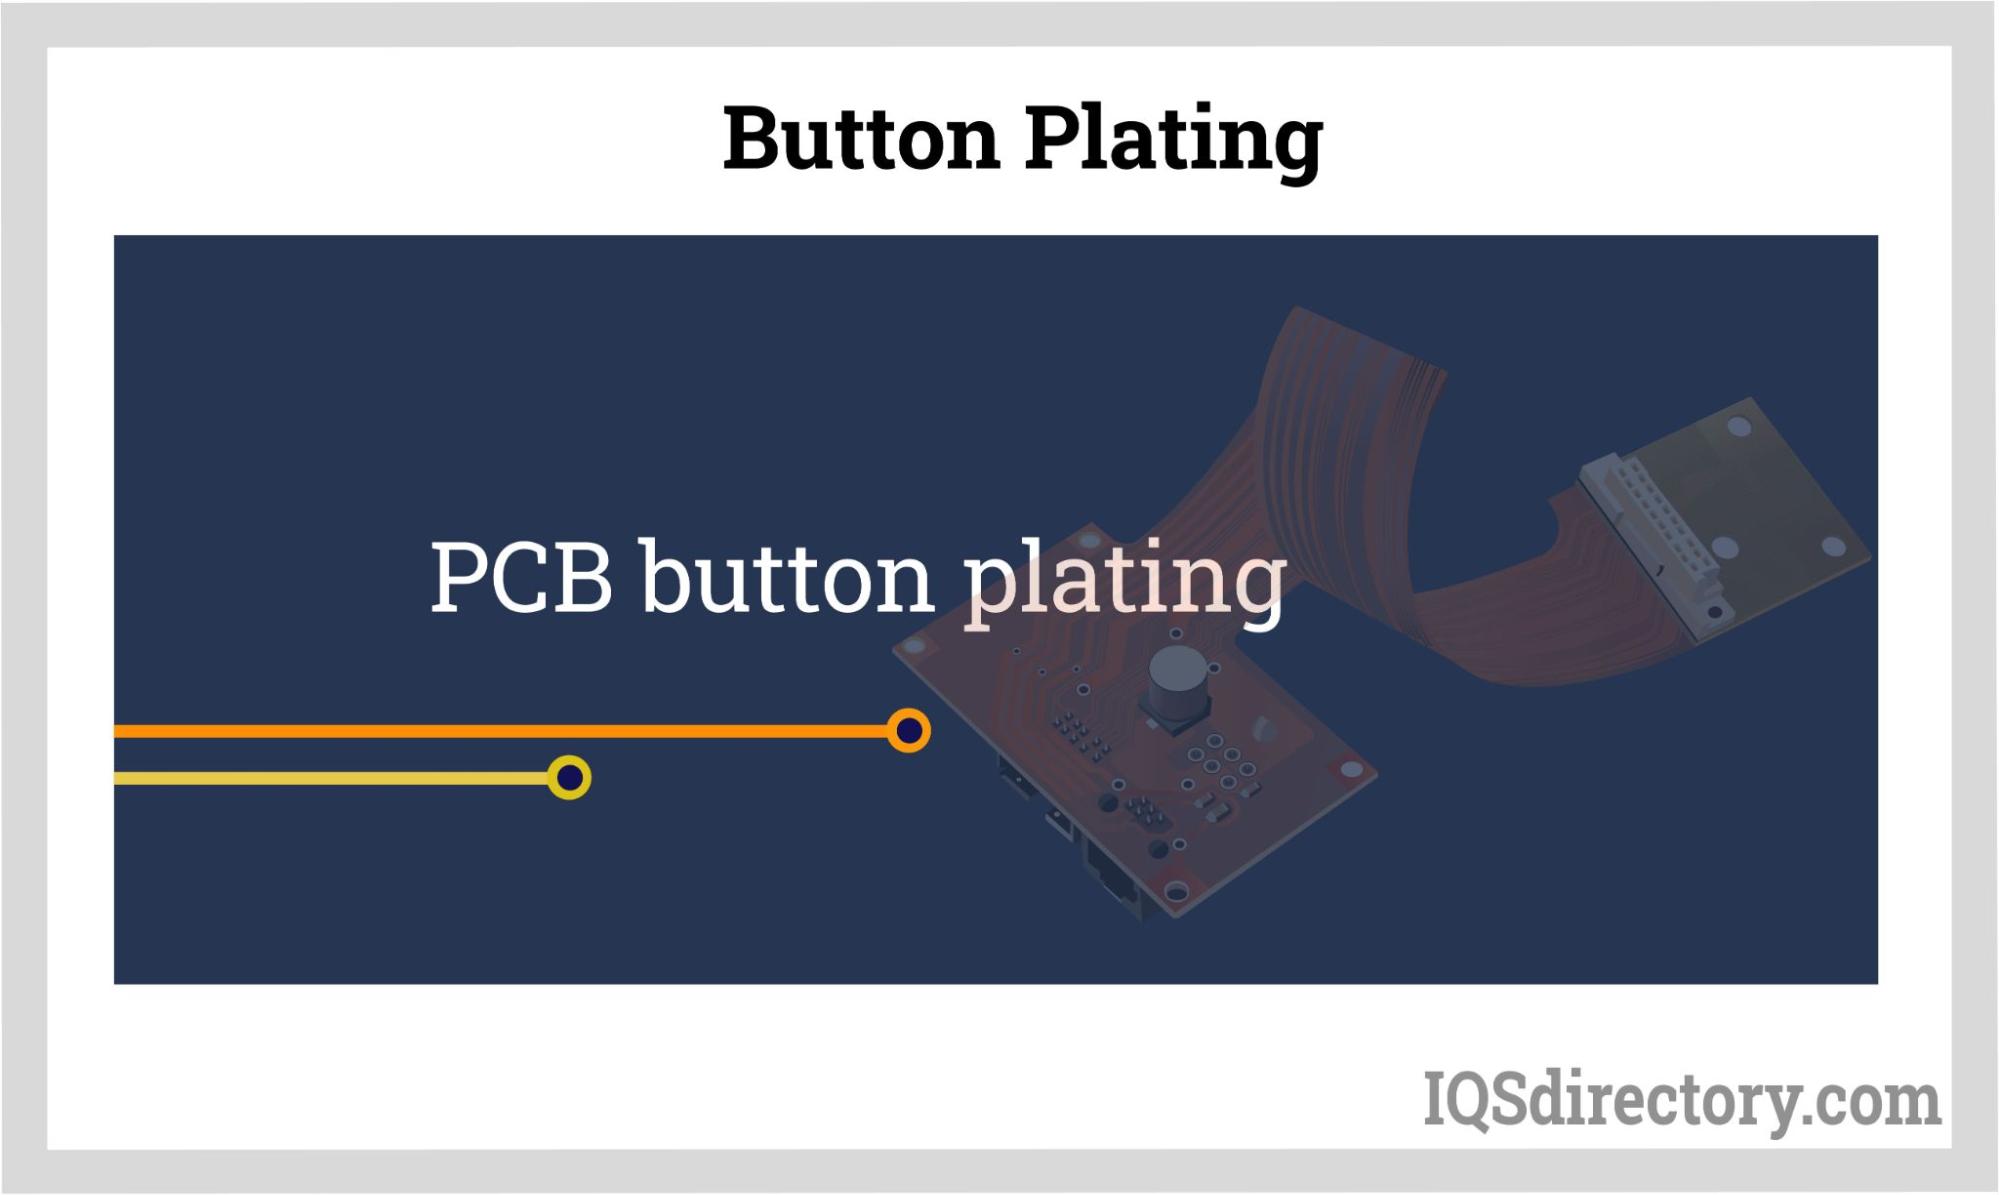 Button Plating